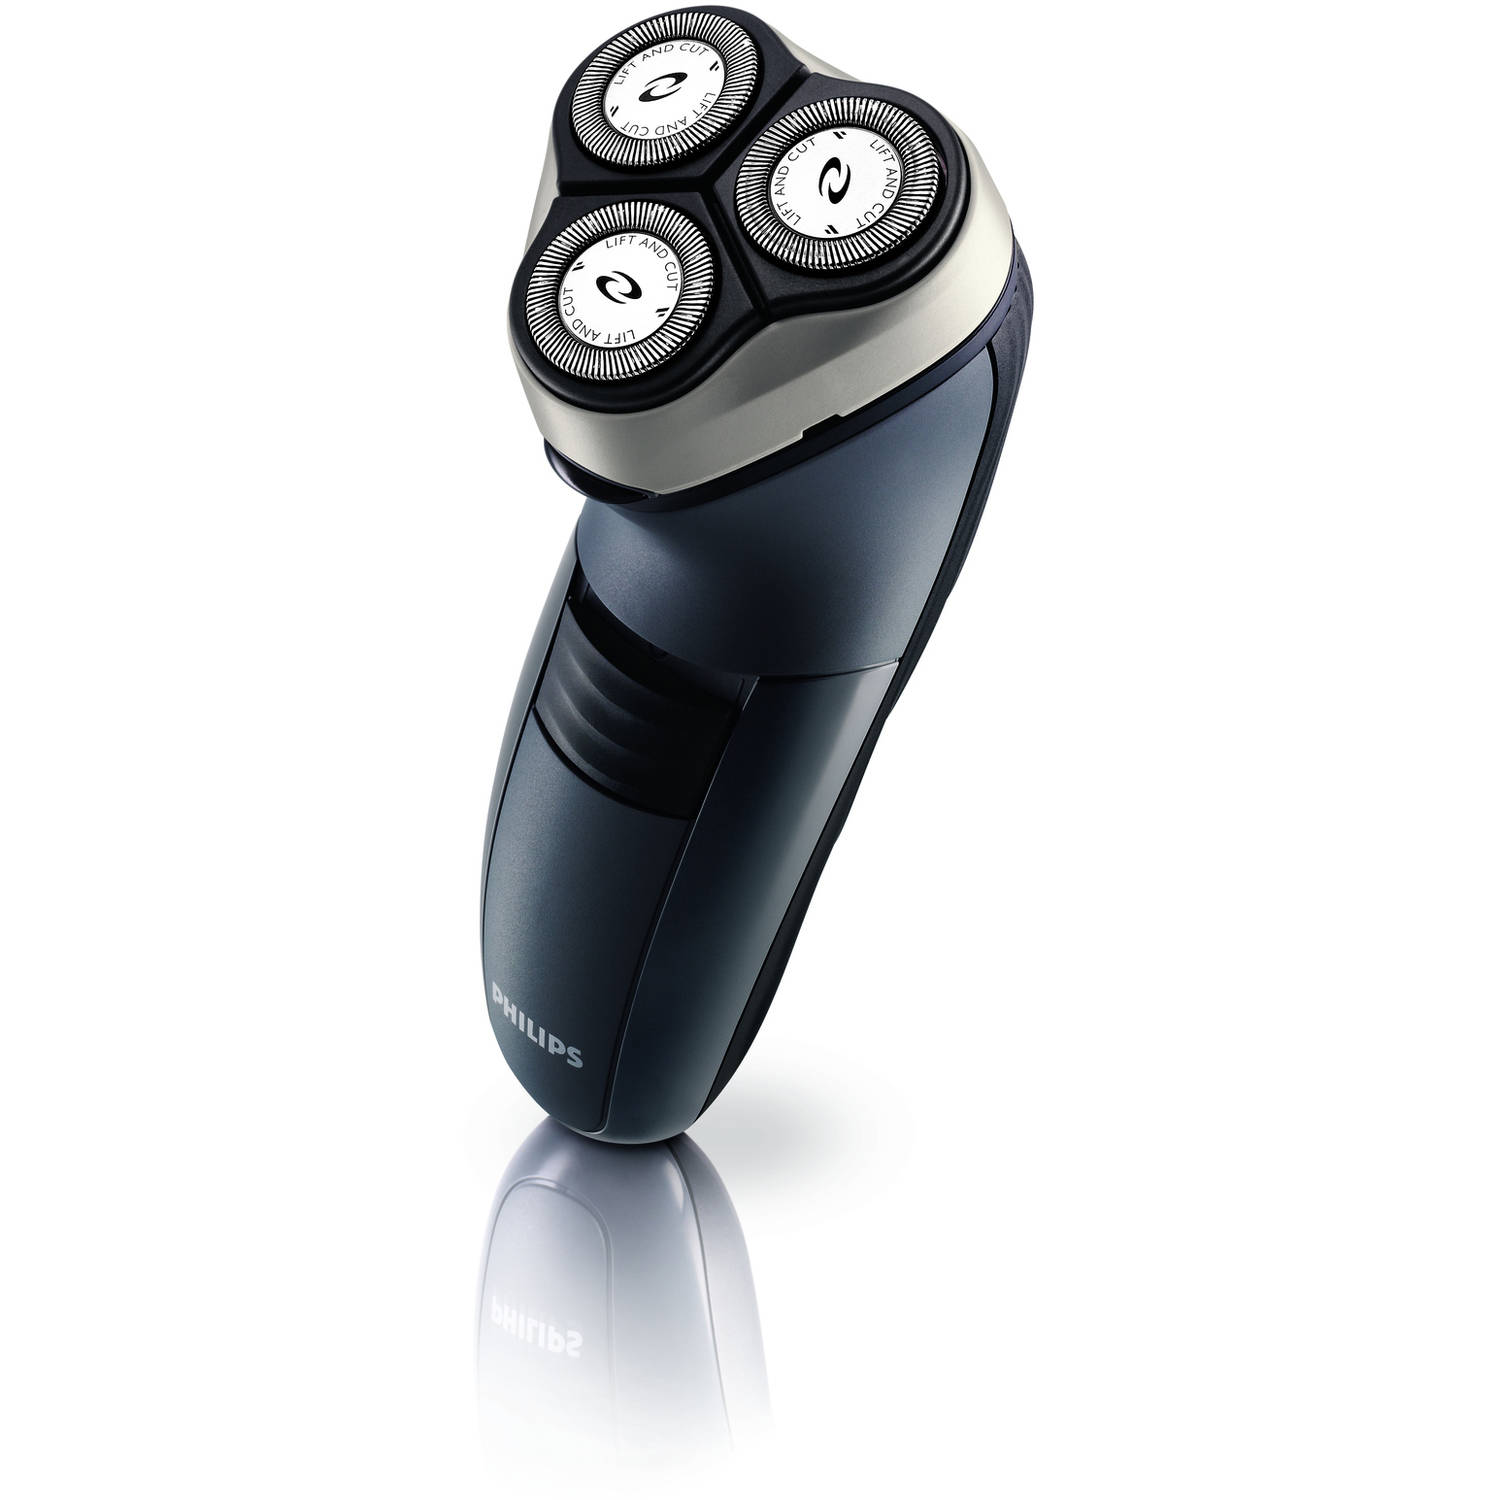 Philips Norelco Electric Shaver 6900 - image 3 of 3